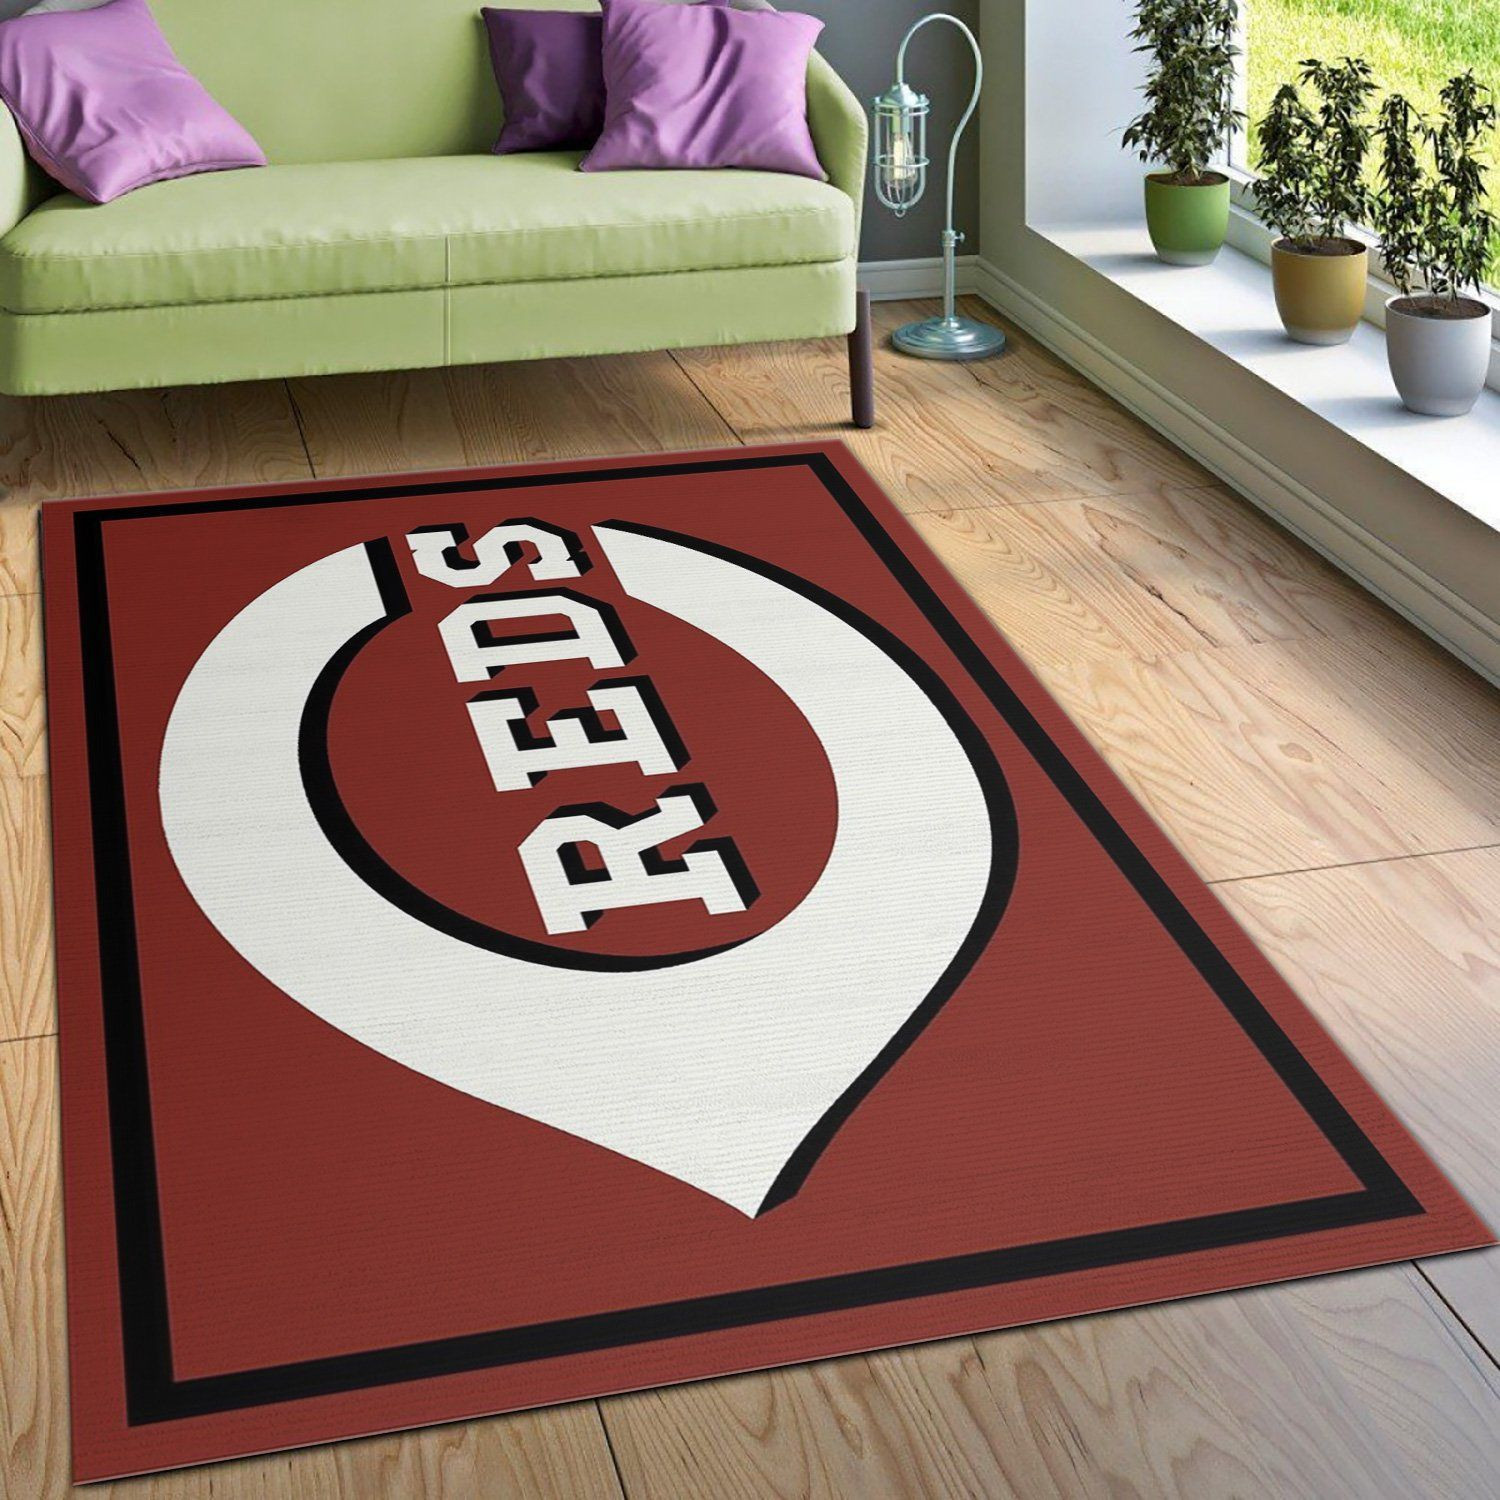 Cincinnati Reds Imperial Spirit MLB Rug Area Rug, Living room and bedroom Rug, Family Gift US Decor - Indoor Outdoor Rugs 3